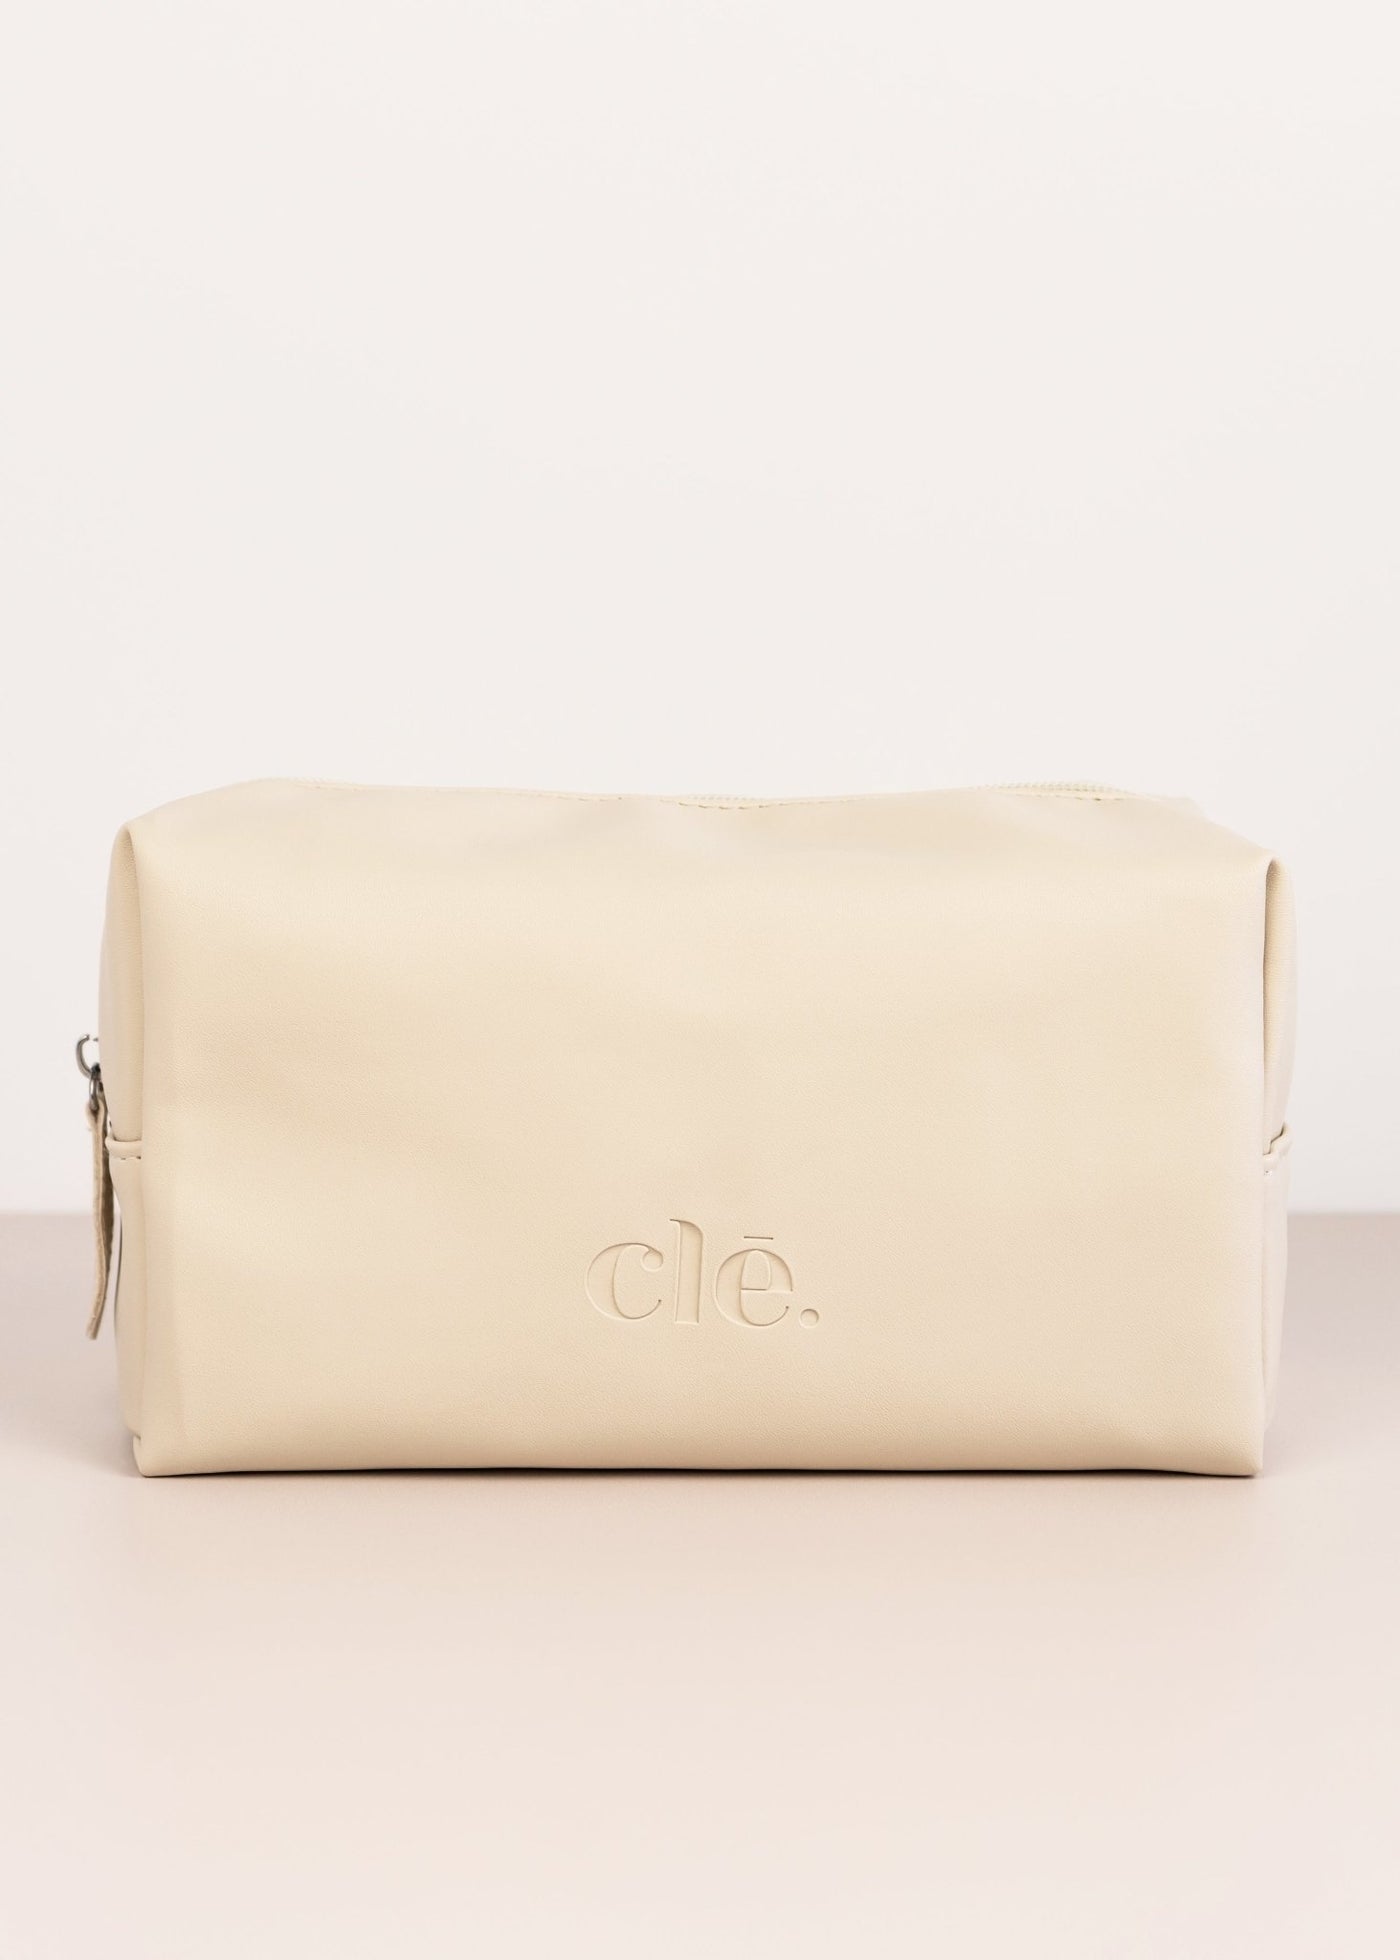 Natural Vegan Leather Cosmetic Case - Maree Ann Co